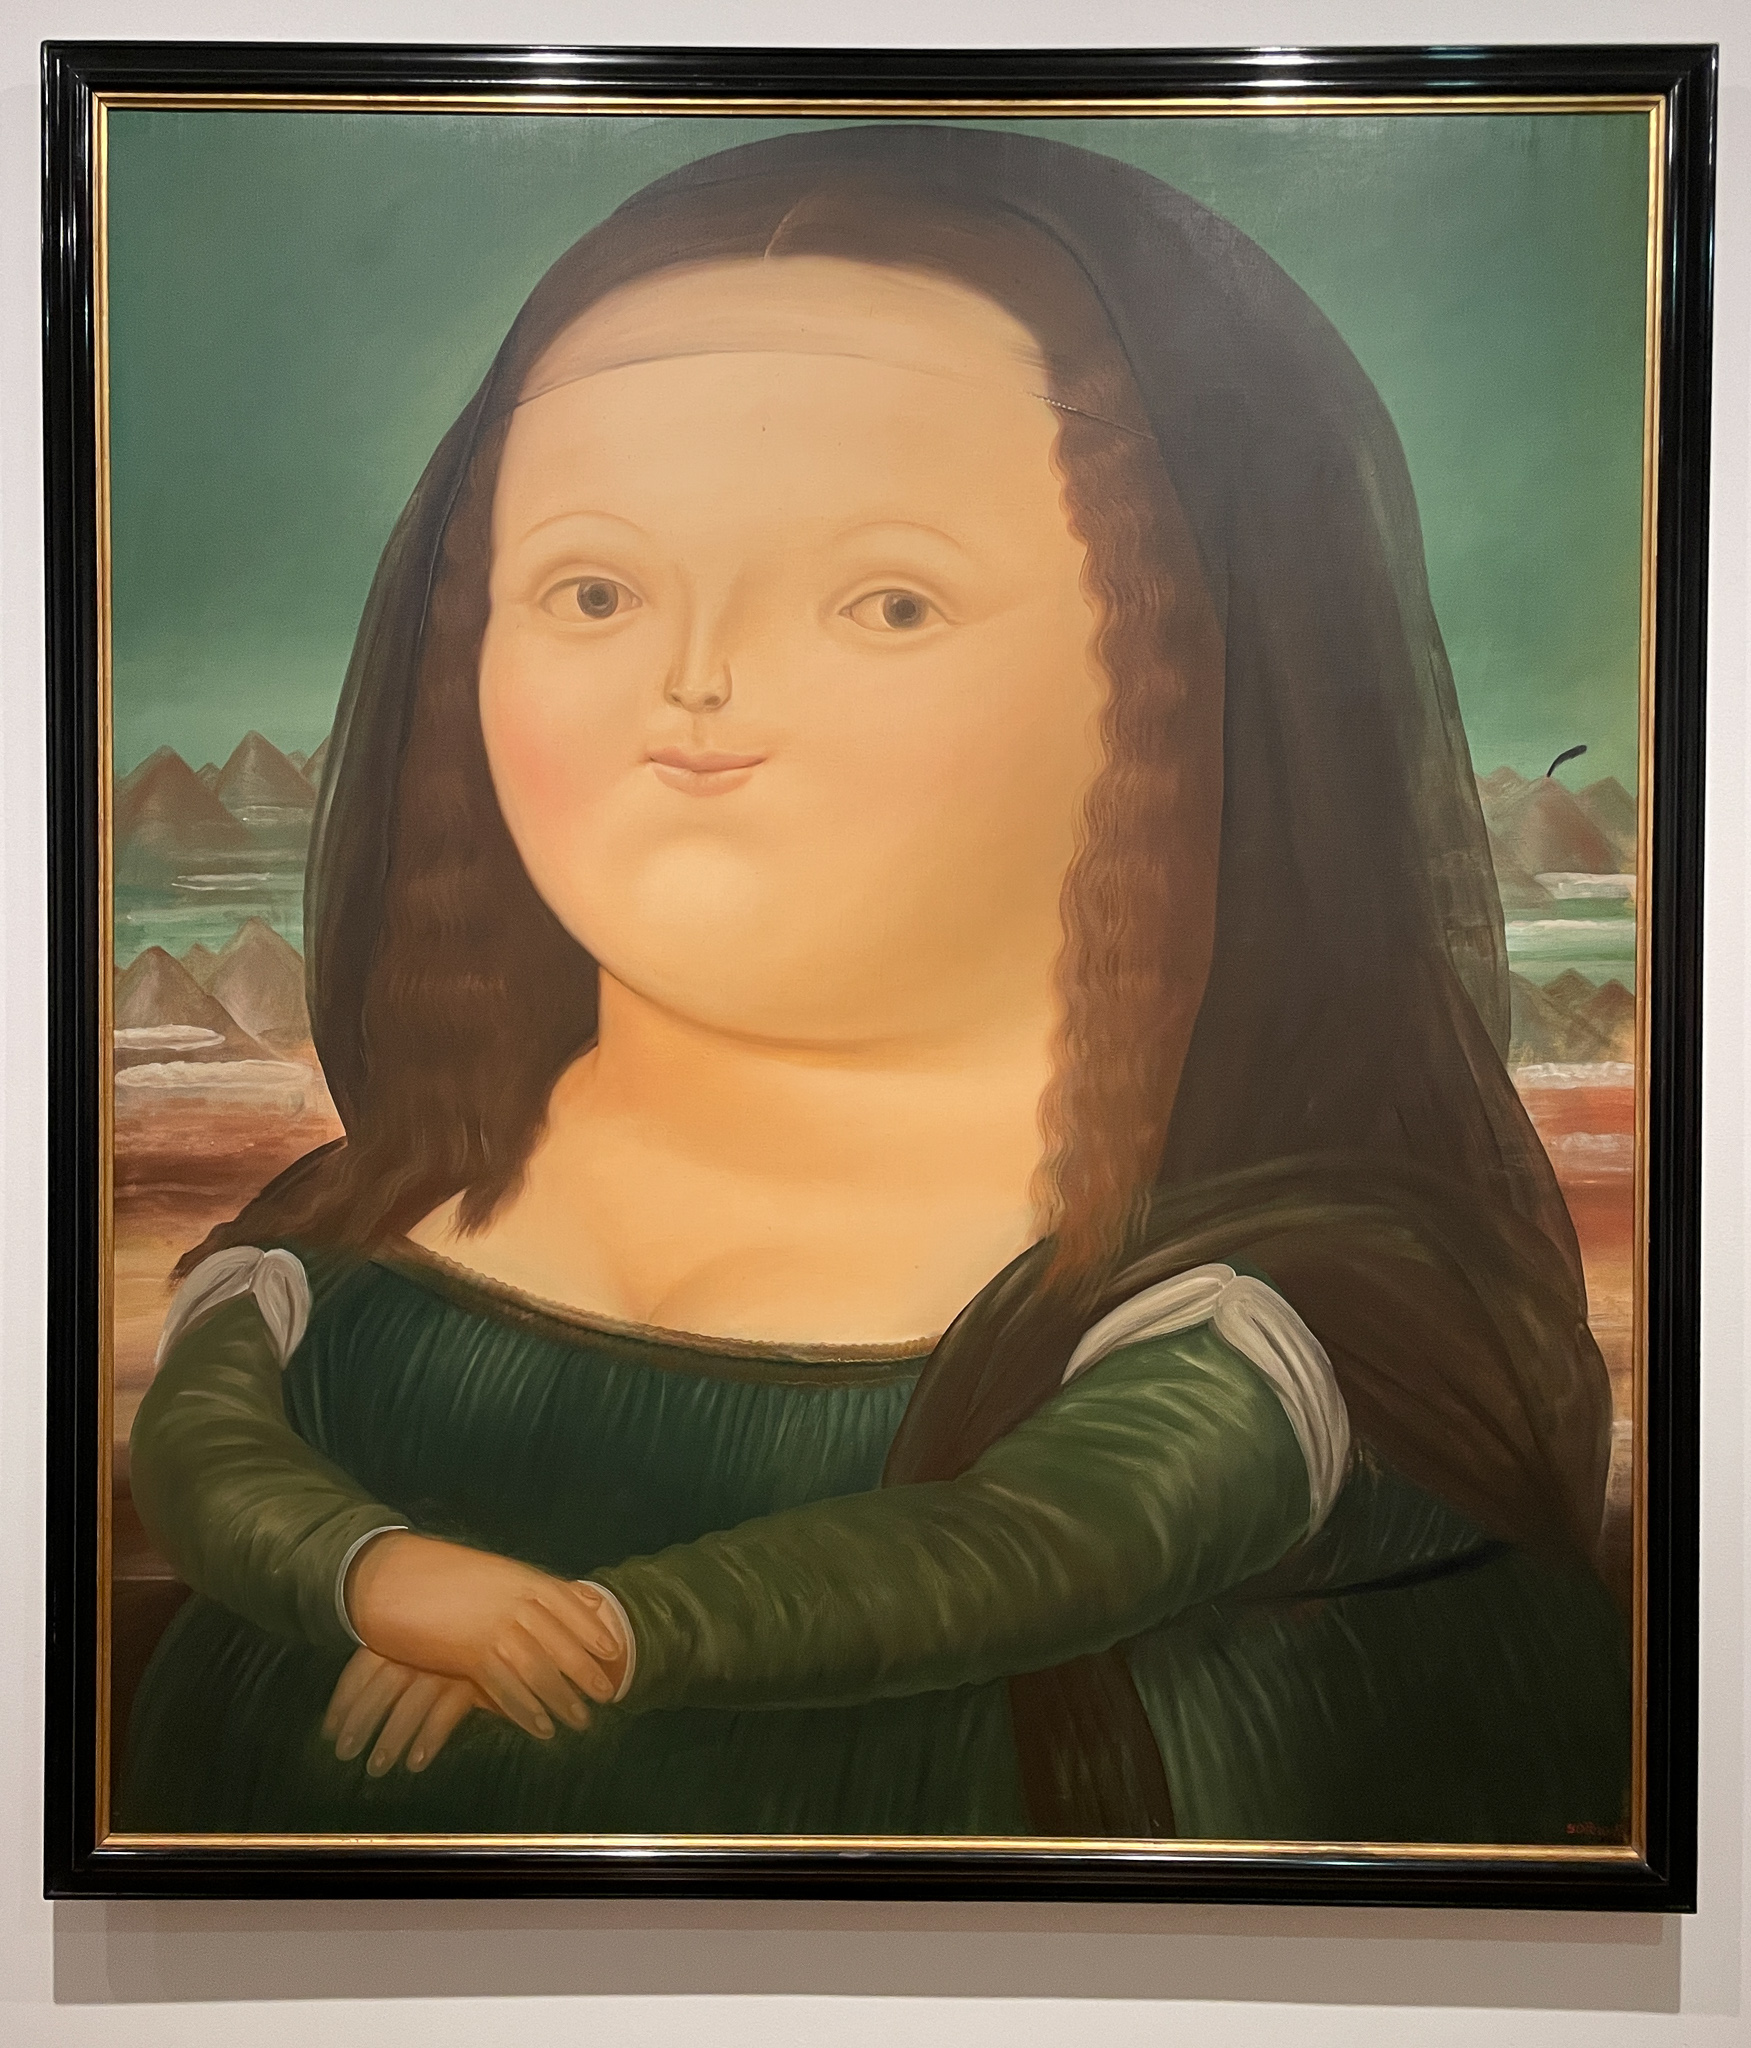 chubby Mona Lisa by Fernando Botero at the Botero Museum in Bogota Colombia